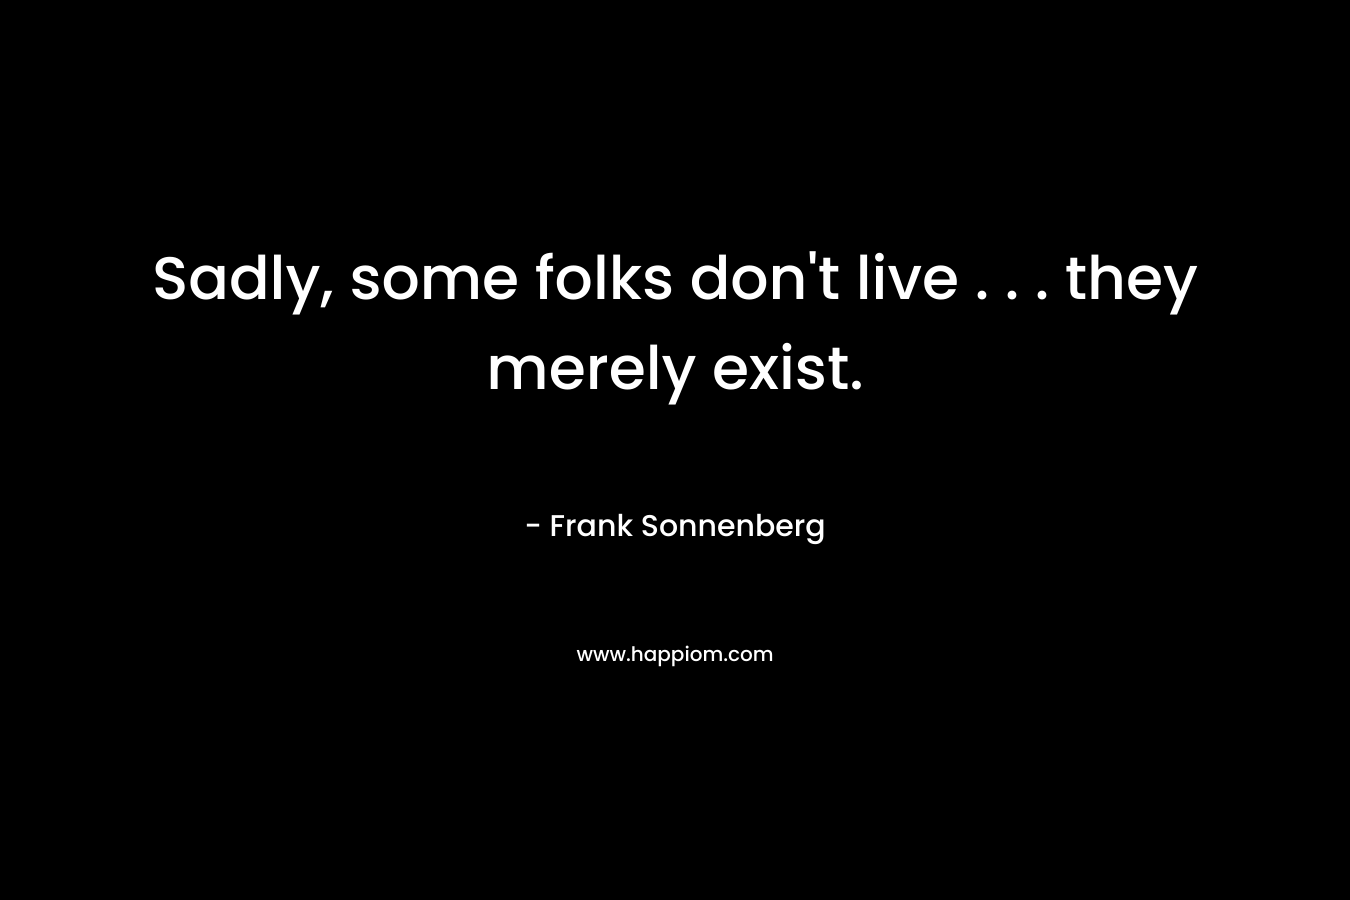 Sadly, some folks don't live . . . they merely exist.